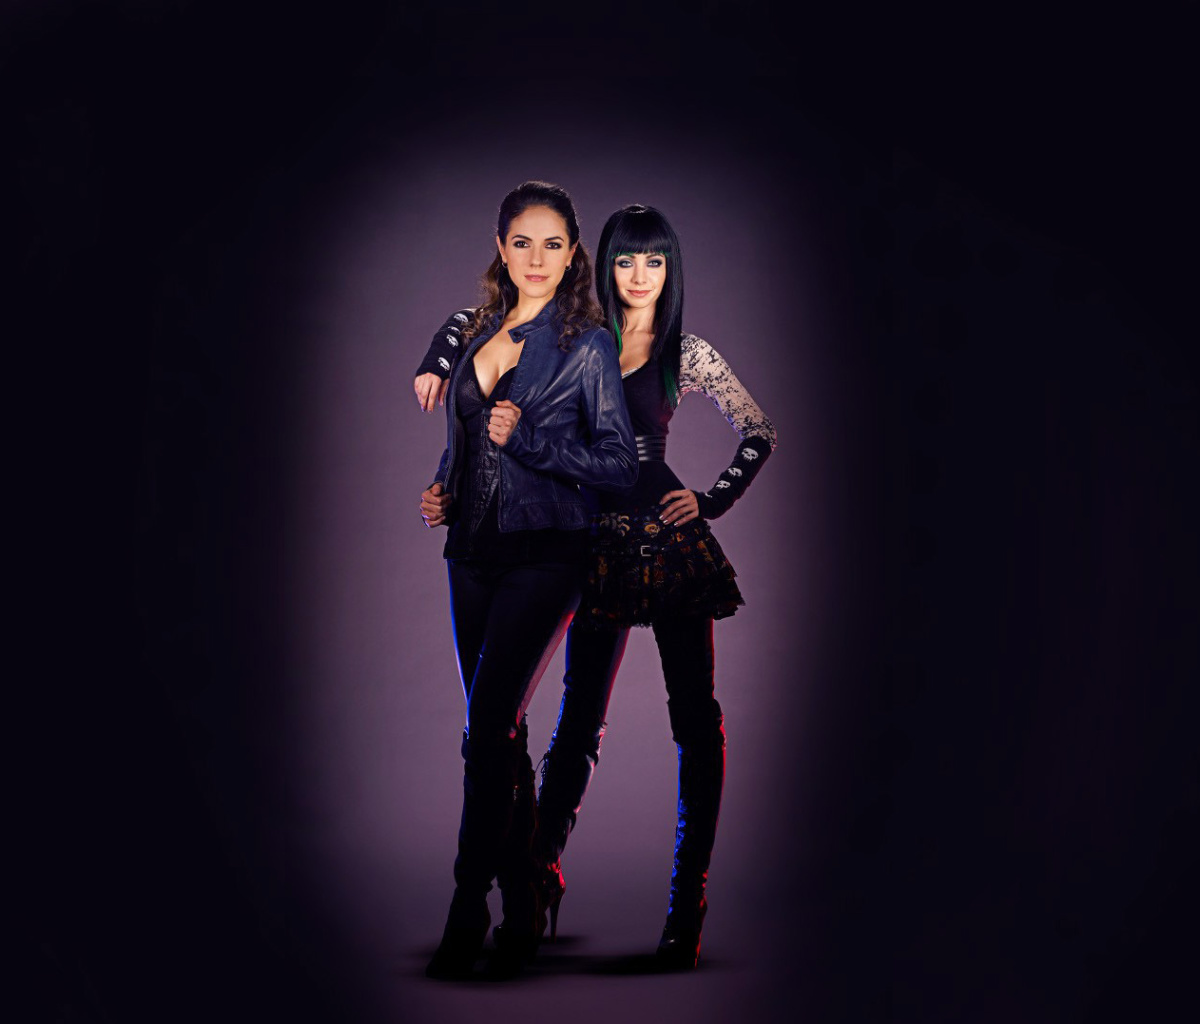 Lost Girl with Anna Silk and Ksenia Solo wallpaper 1200x1024